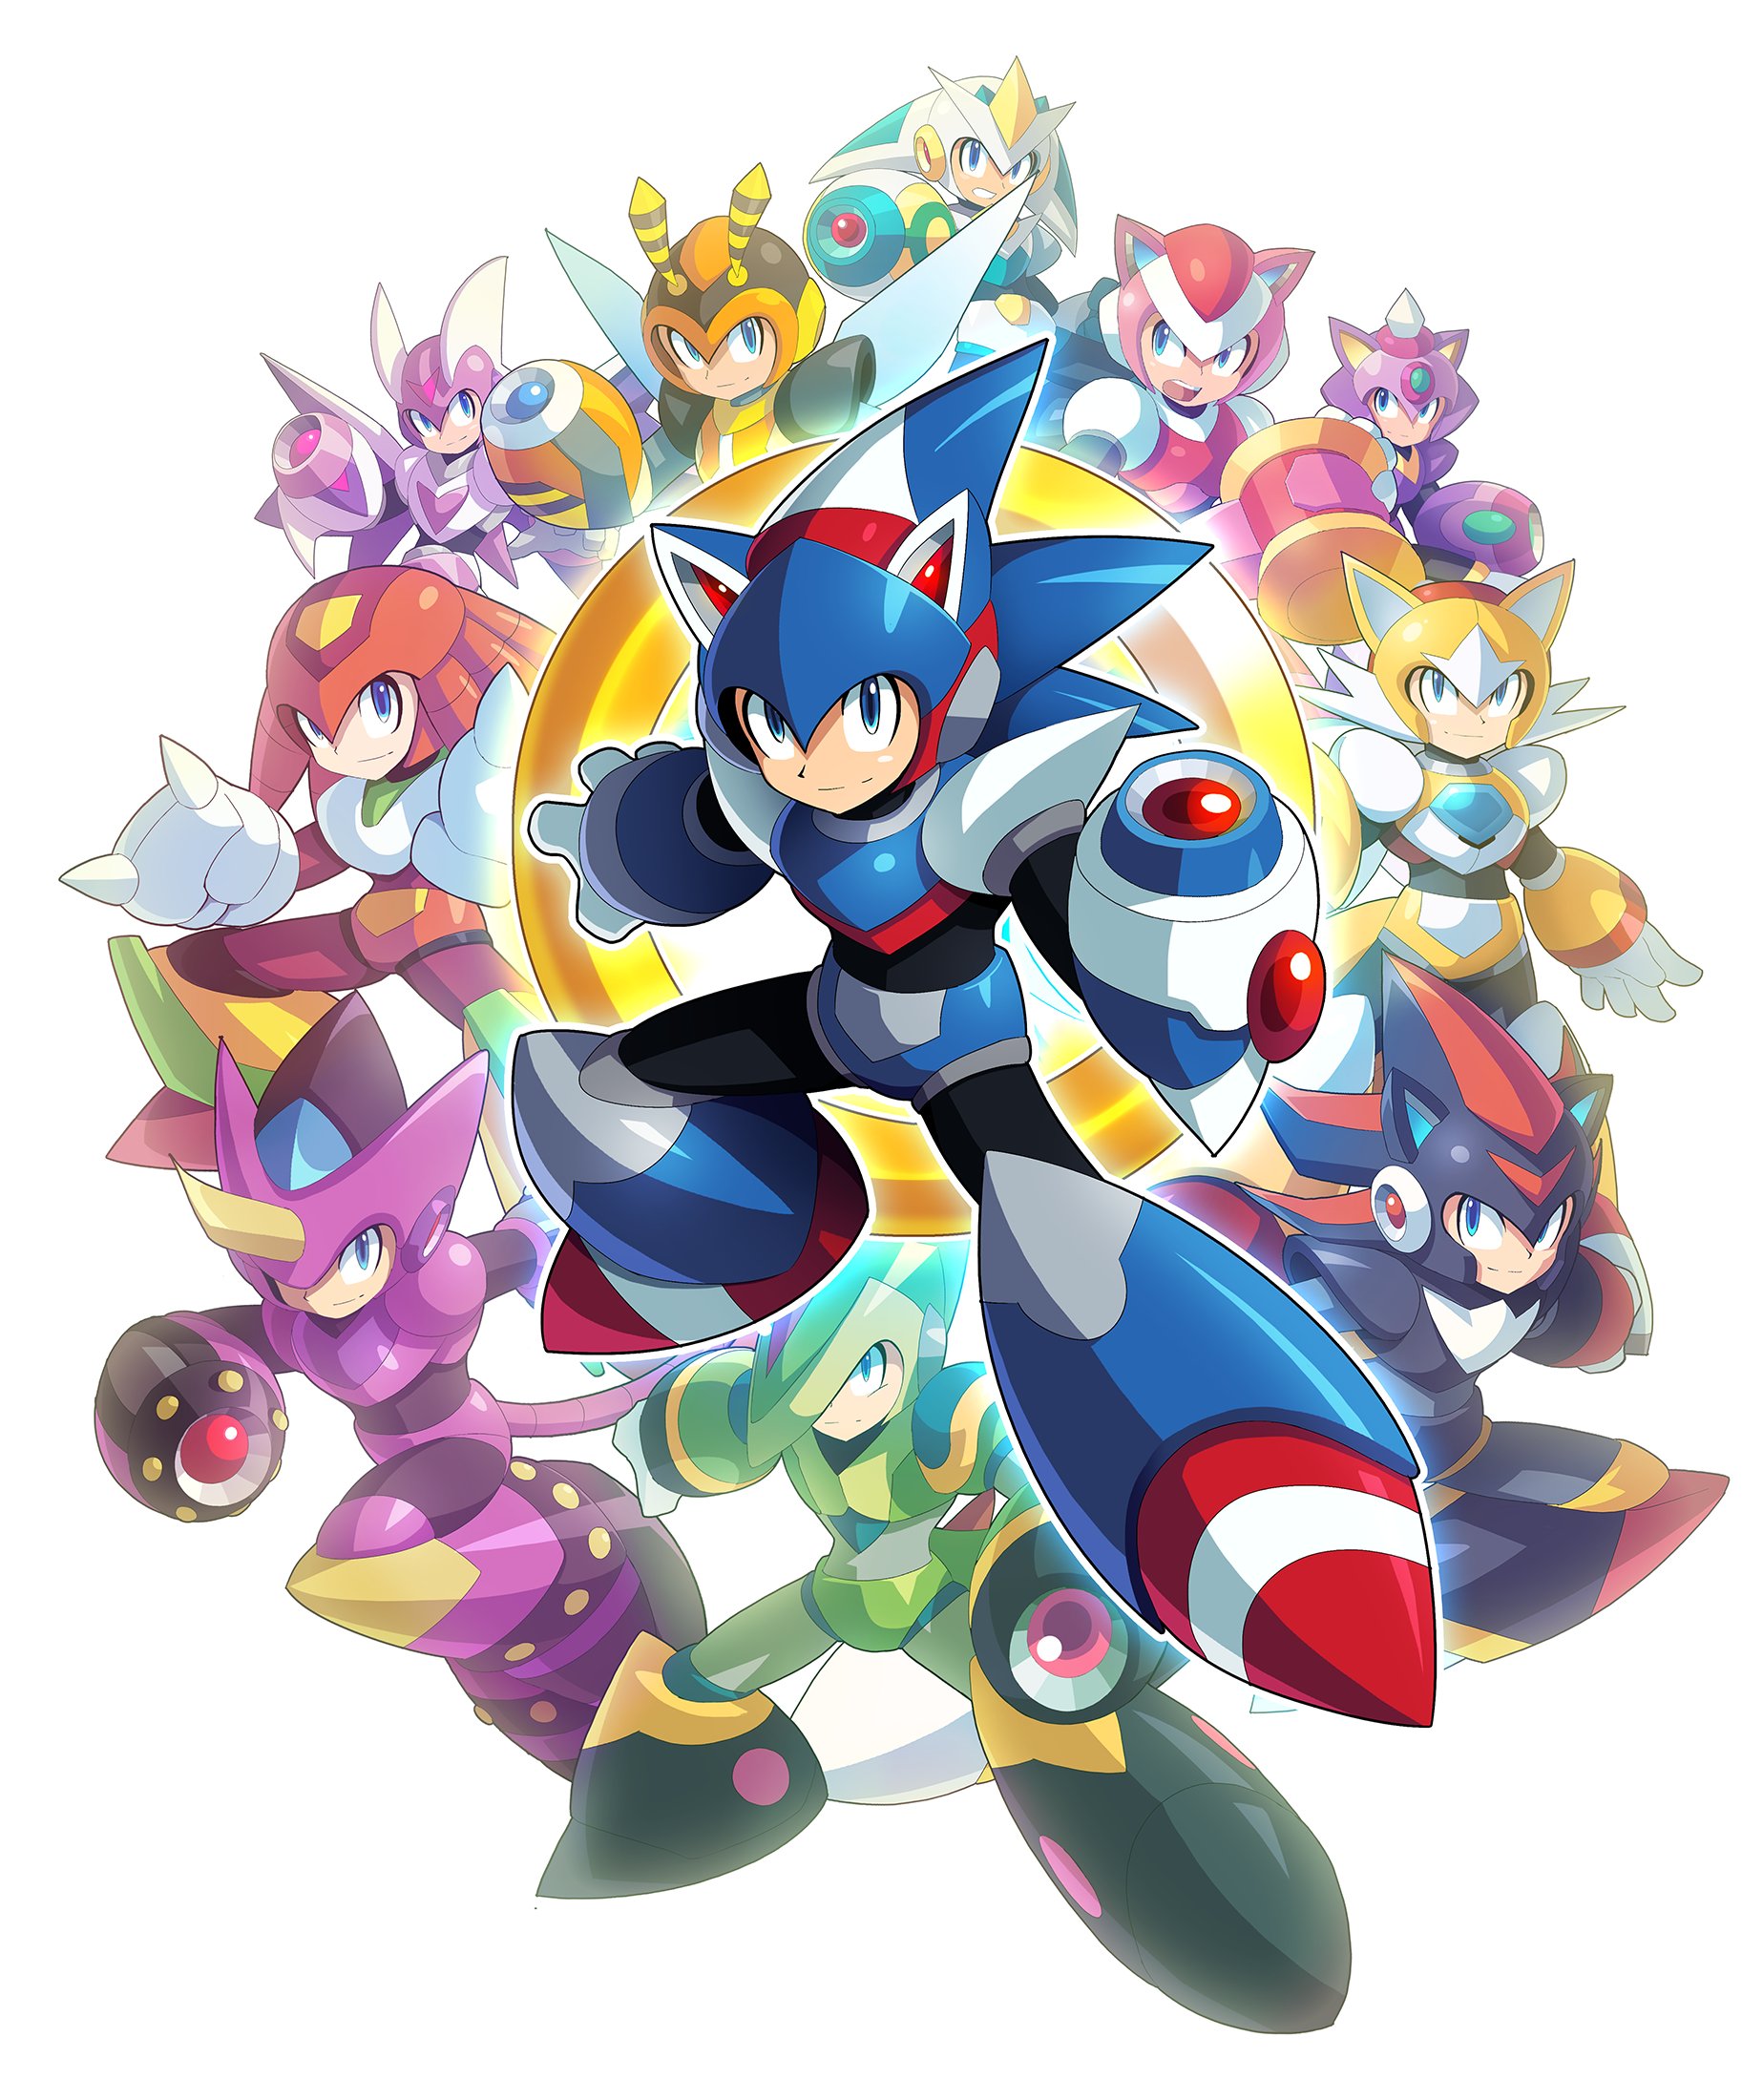 Innovator123 on X: Megaman ZX/Pokemon Crossover art Part 1. Was planning  to upload all in one go after I finished Ultra Necrozma today but I just  learned that there's a limit. This